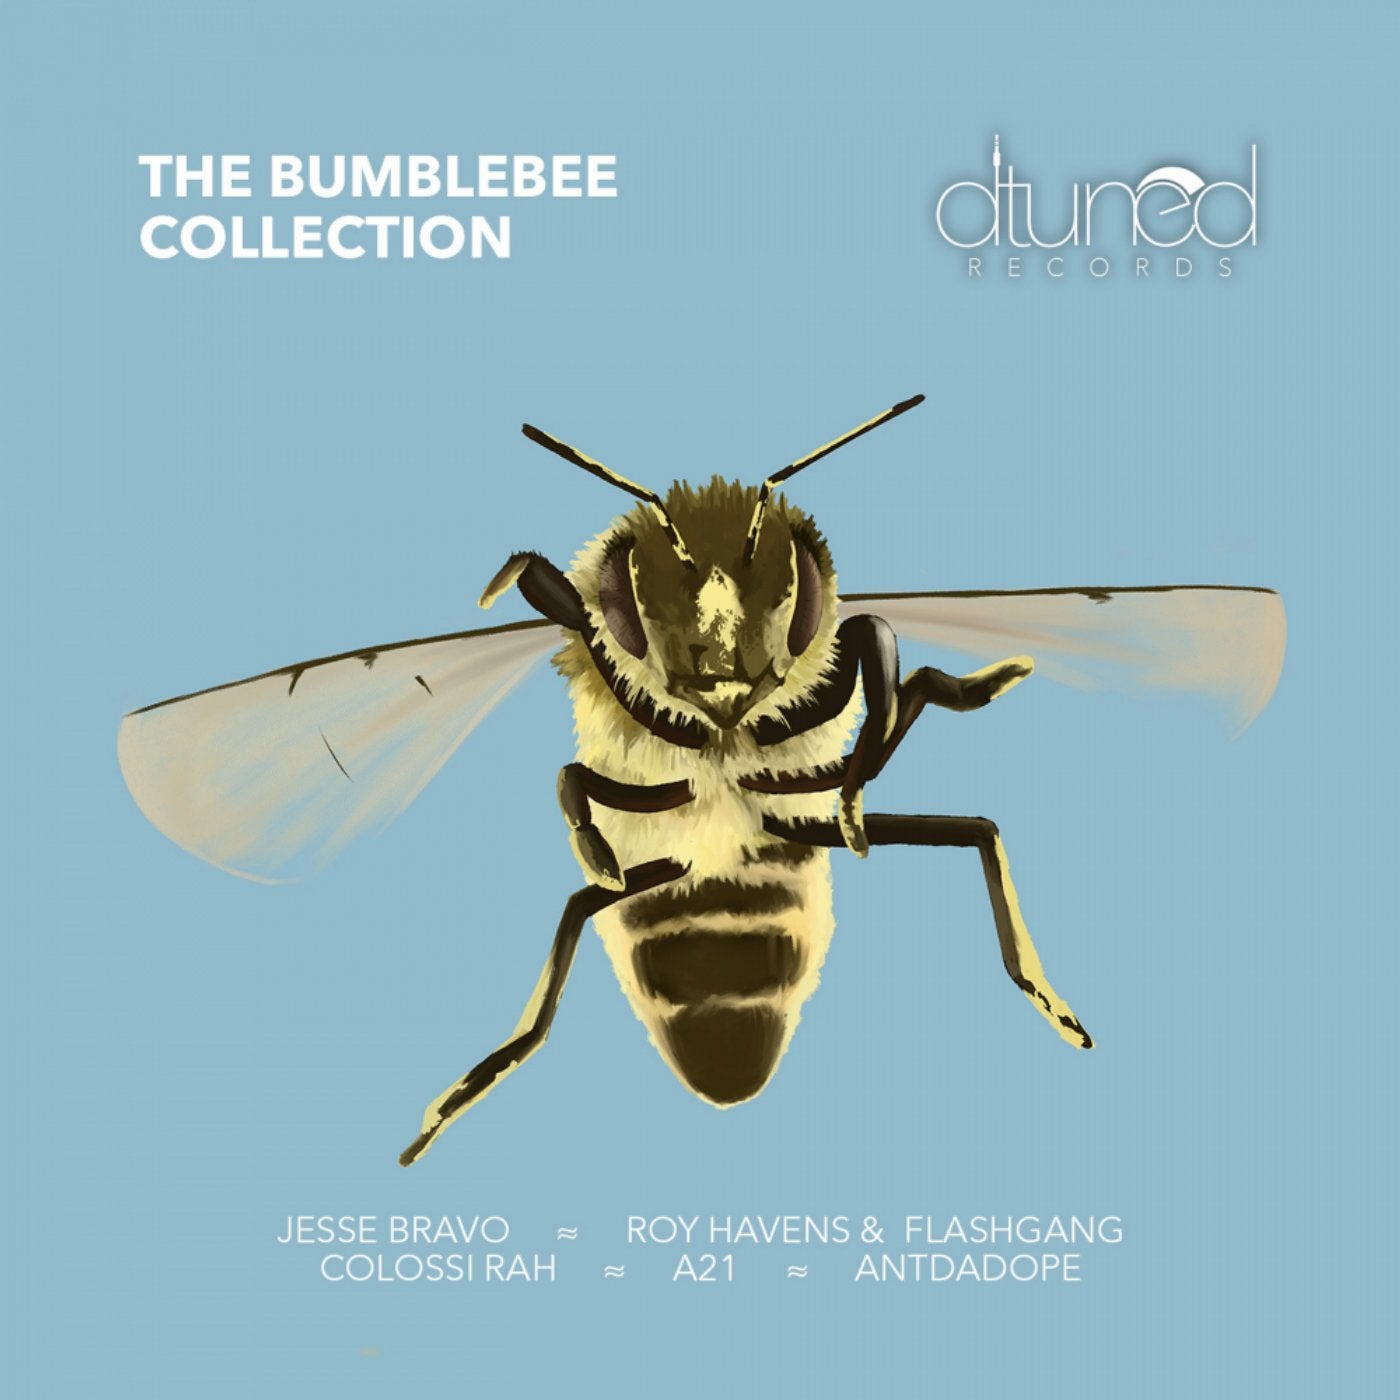 The Bumblebee Collection